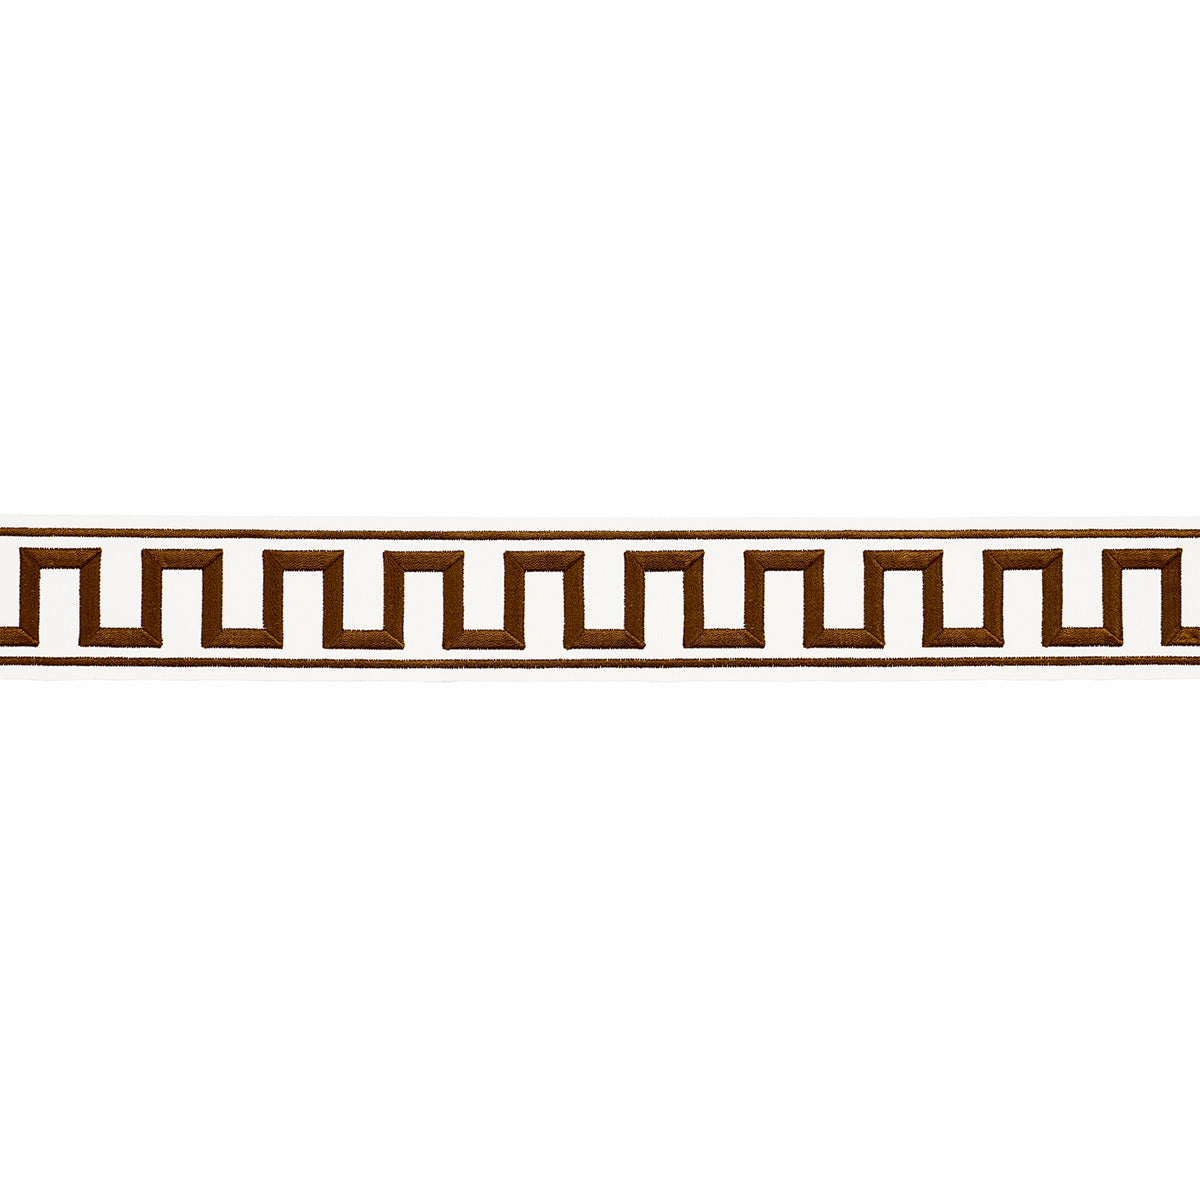 GREEK KEY EMBROIDERED TAPE | BROWN